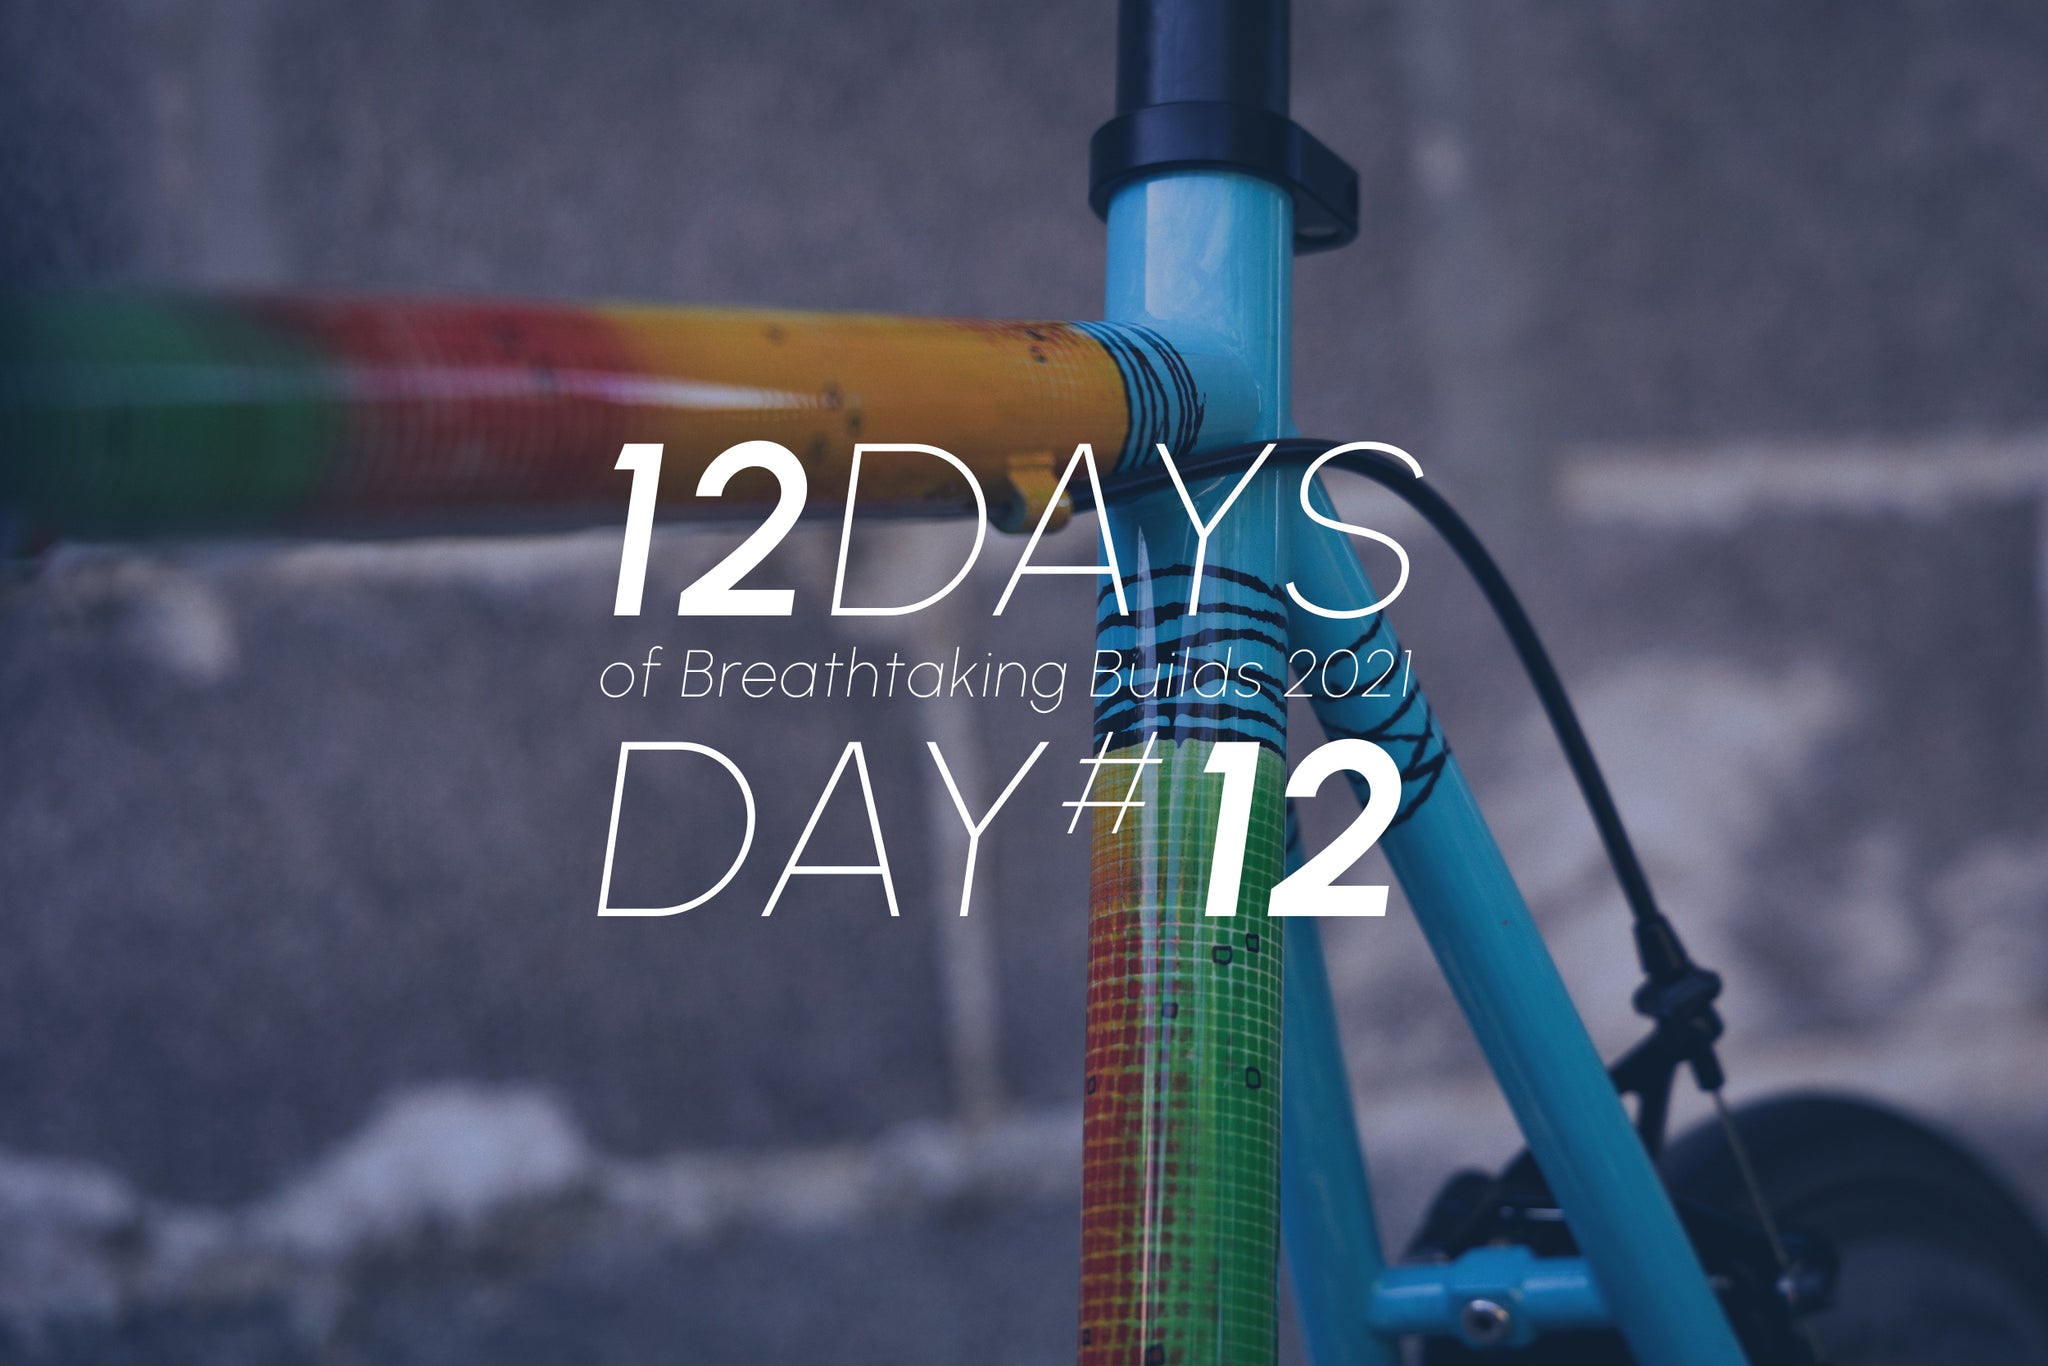 12 Days of Breathtaking Builds 2021: Day 12 - A Sky Blue Ciavete Pegoretti